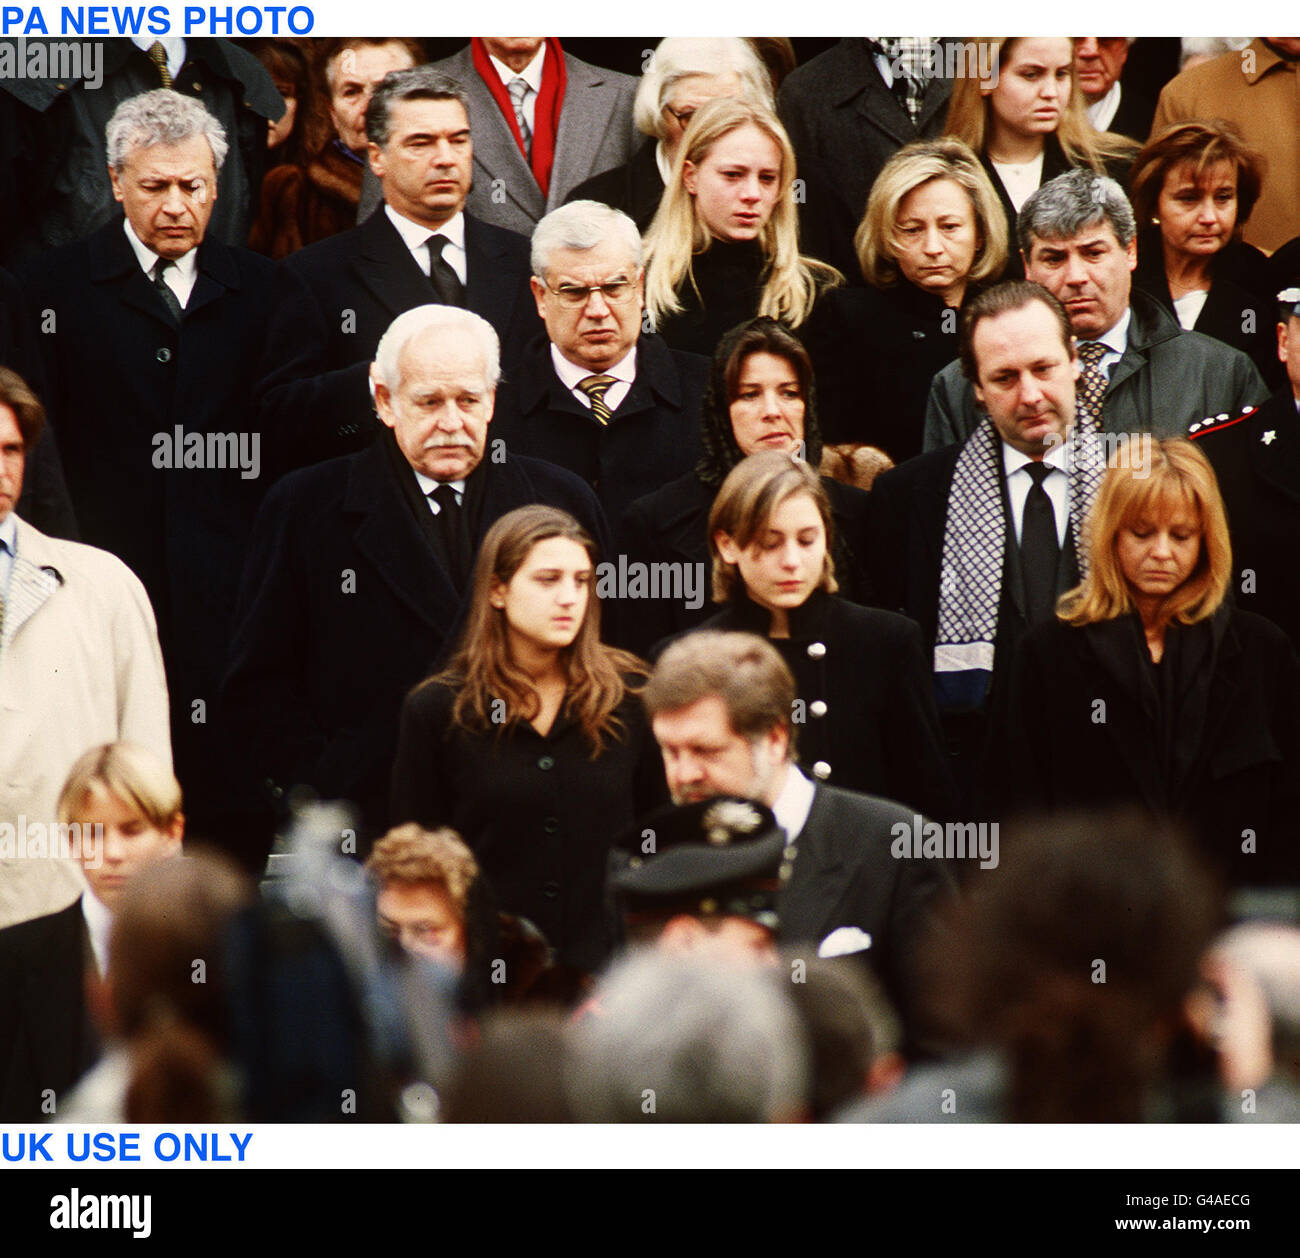 PA NEWS PHOTO: 26/1/98 : UK USE ONLY PRINCE RAINIER AND PRINCESS CAROLINE OF MONACO AT THE FUNERAL OF GIANCARLO CASIRAGHI, THE FATHER OF STEFANO CASIRAGHI. Stock Photo